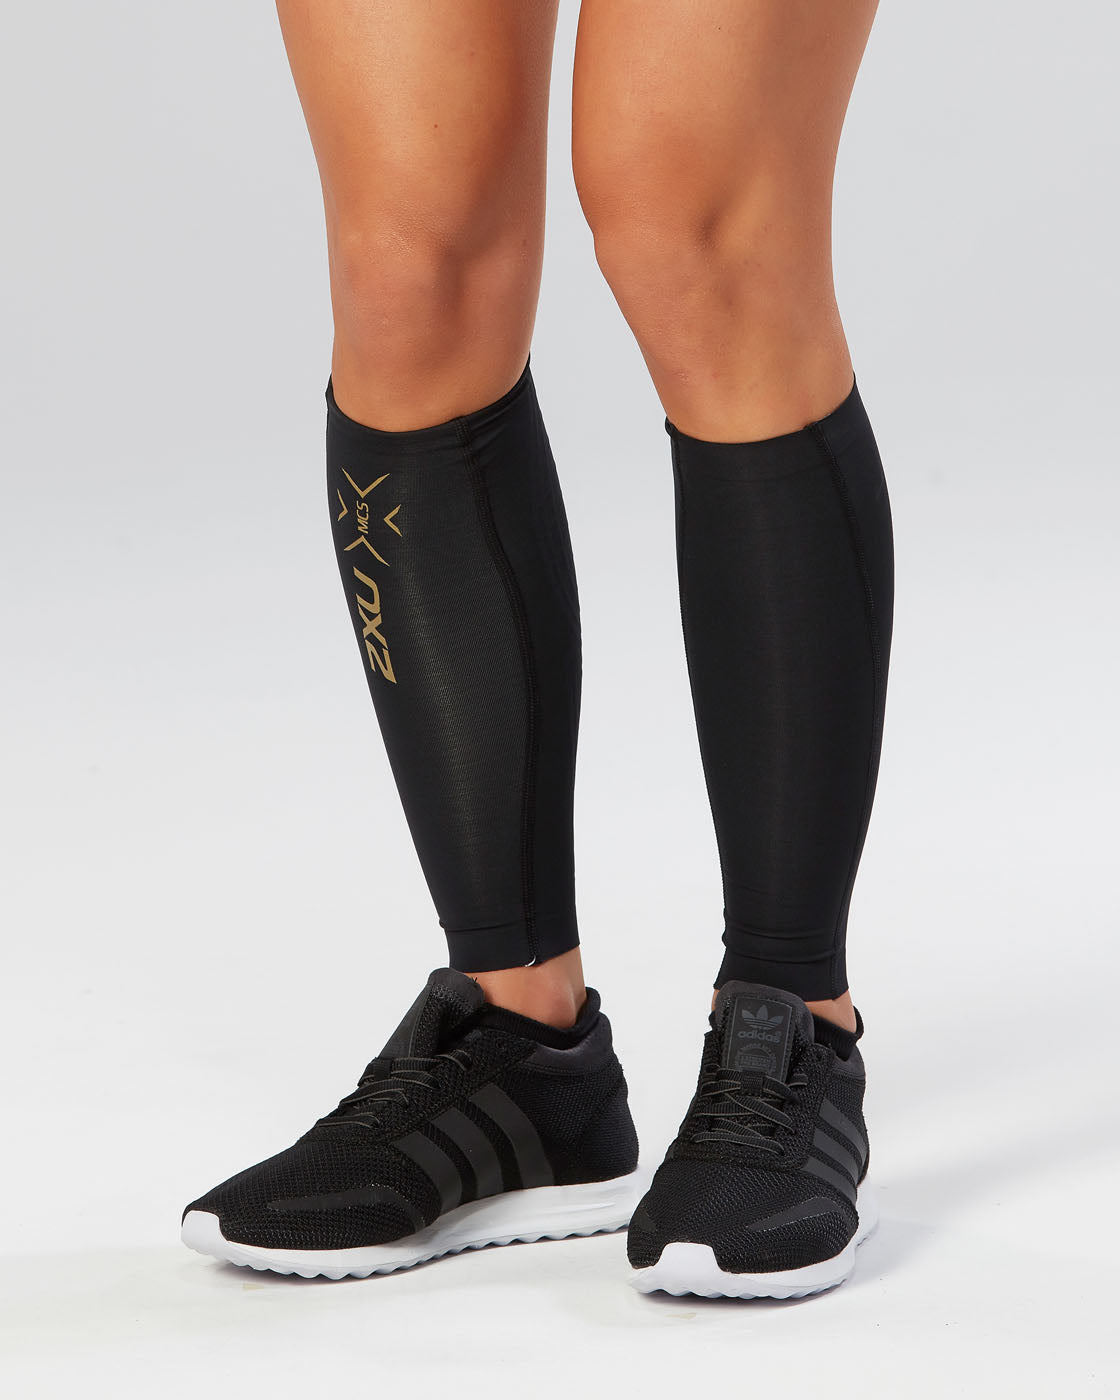 Calf Compression Sleeves (2-Pack) | Black/Gold | 2XU